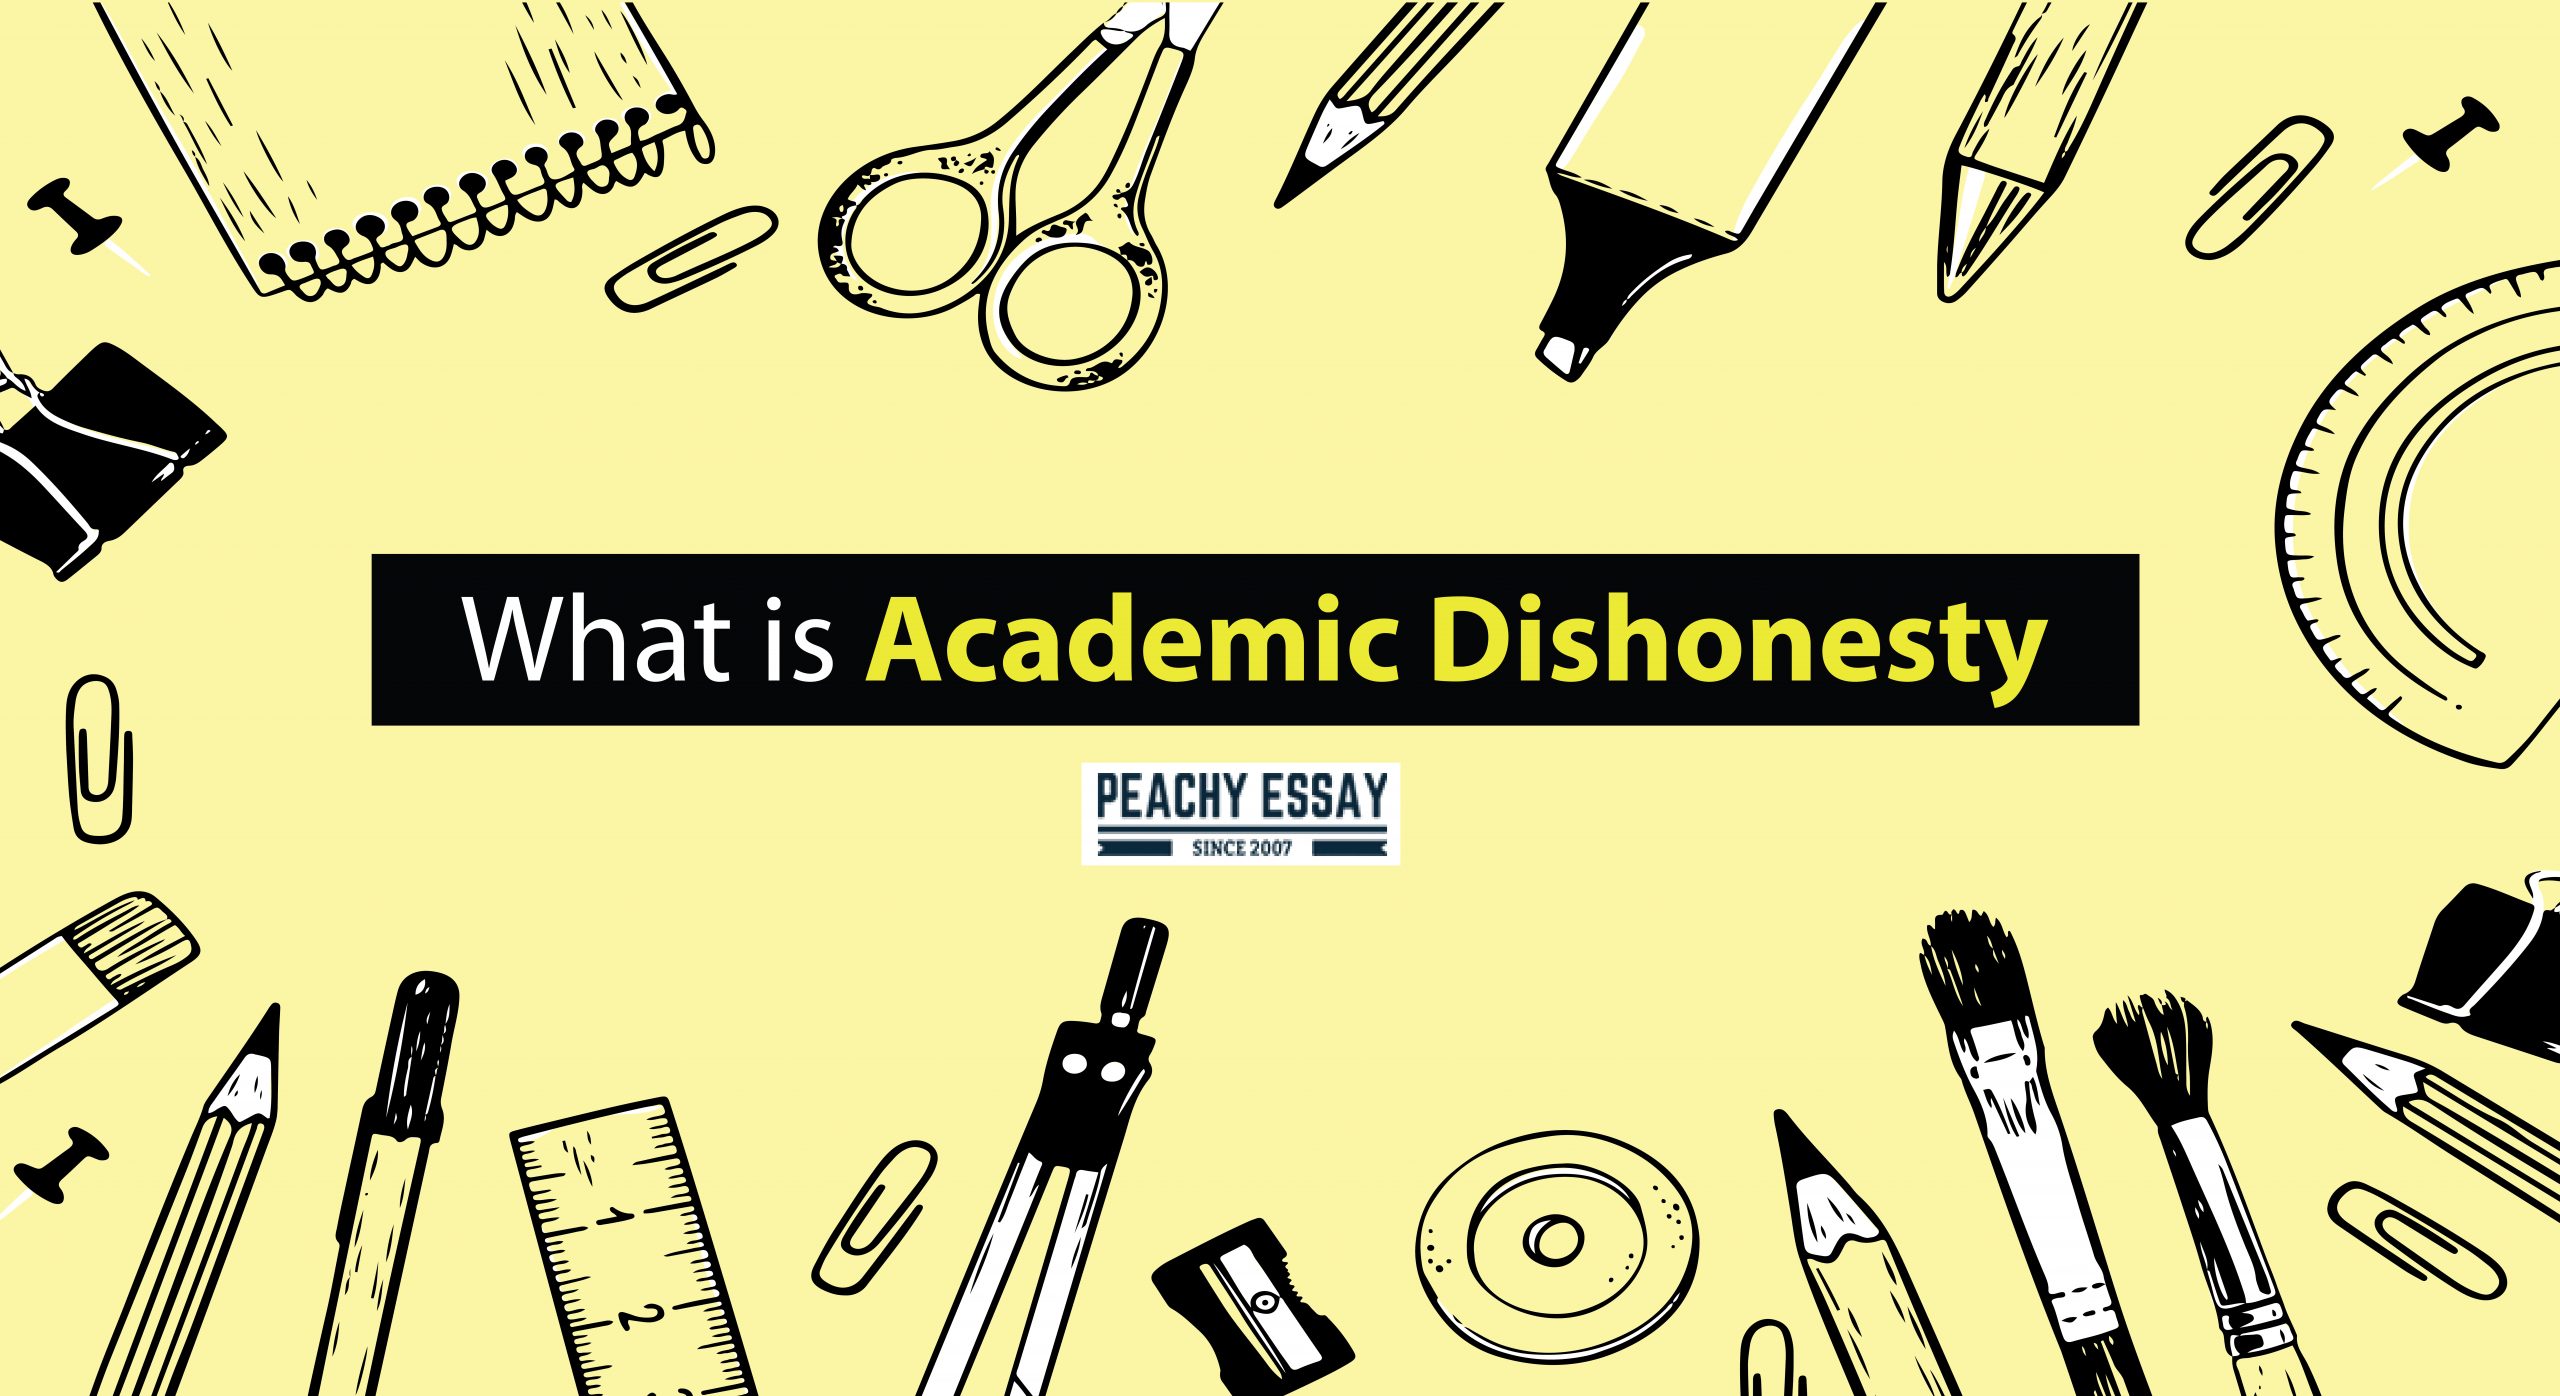 essay titles for academic dishonesty